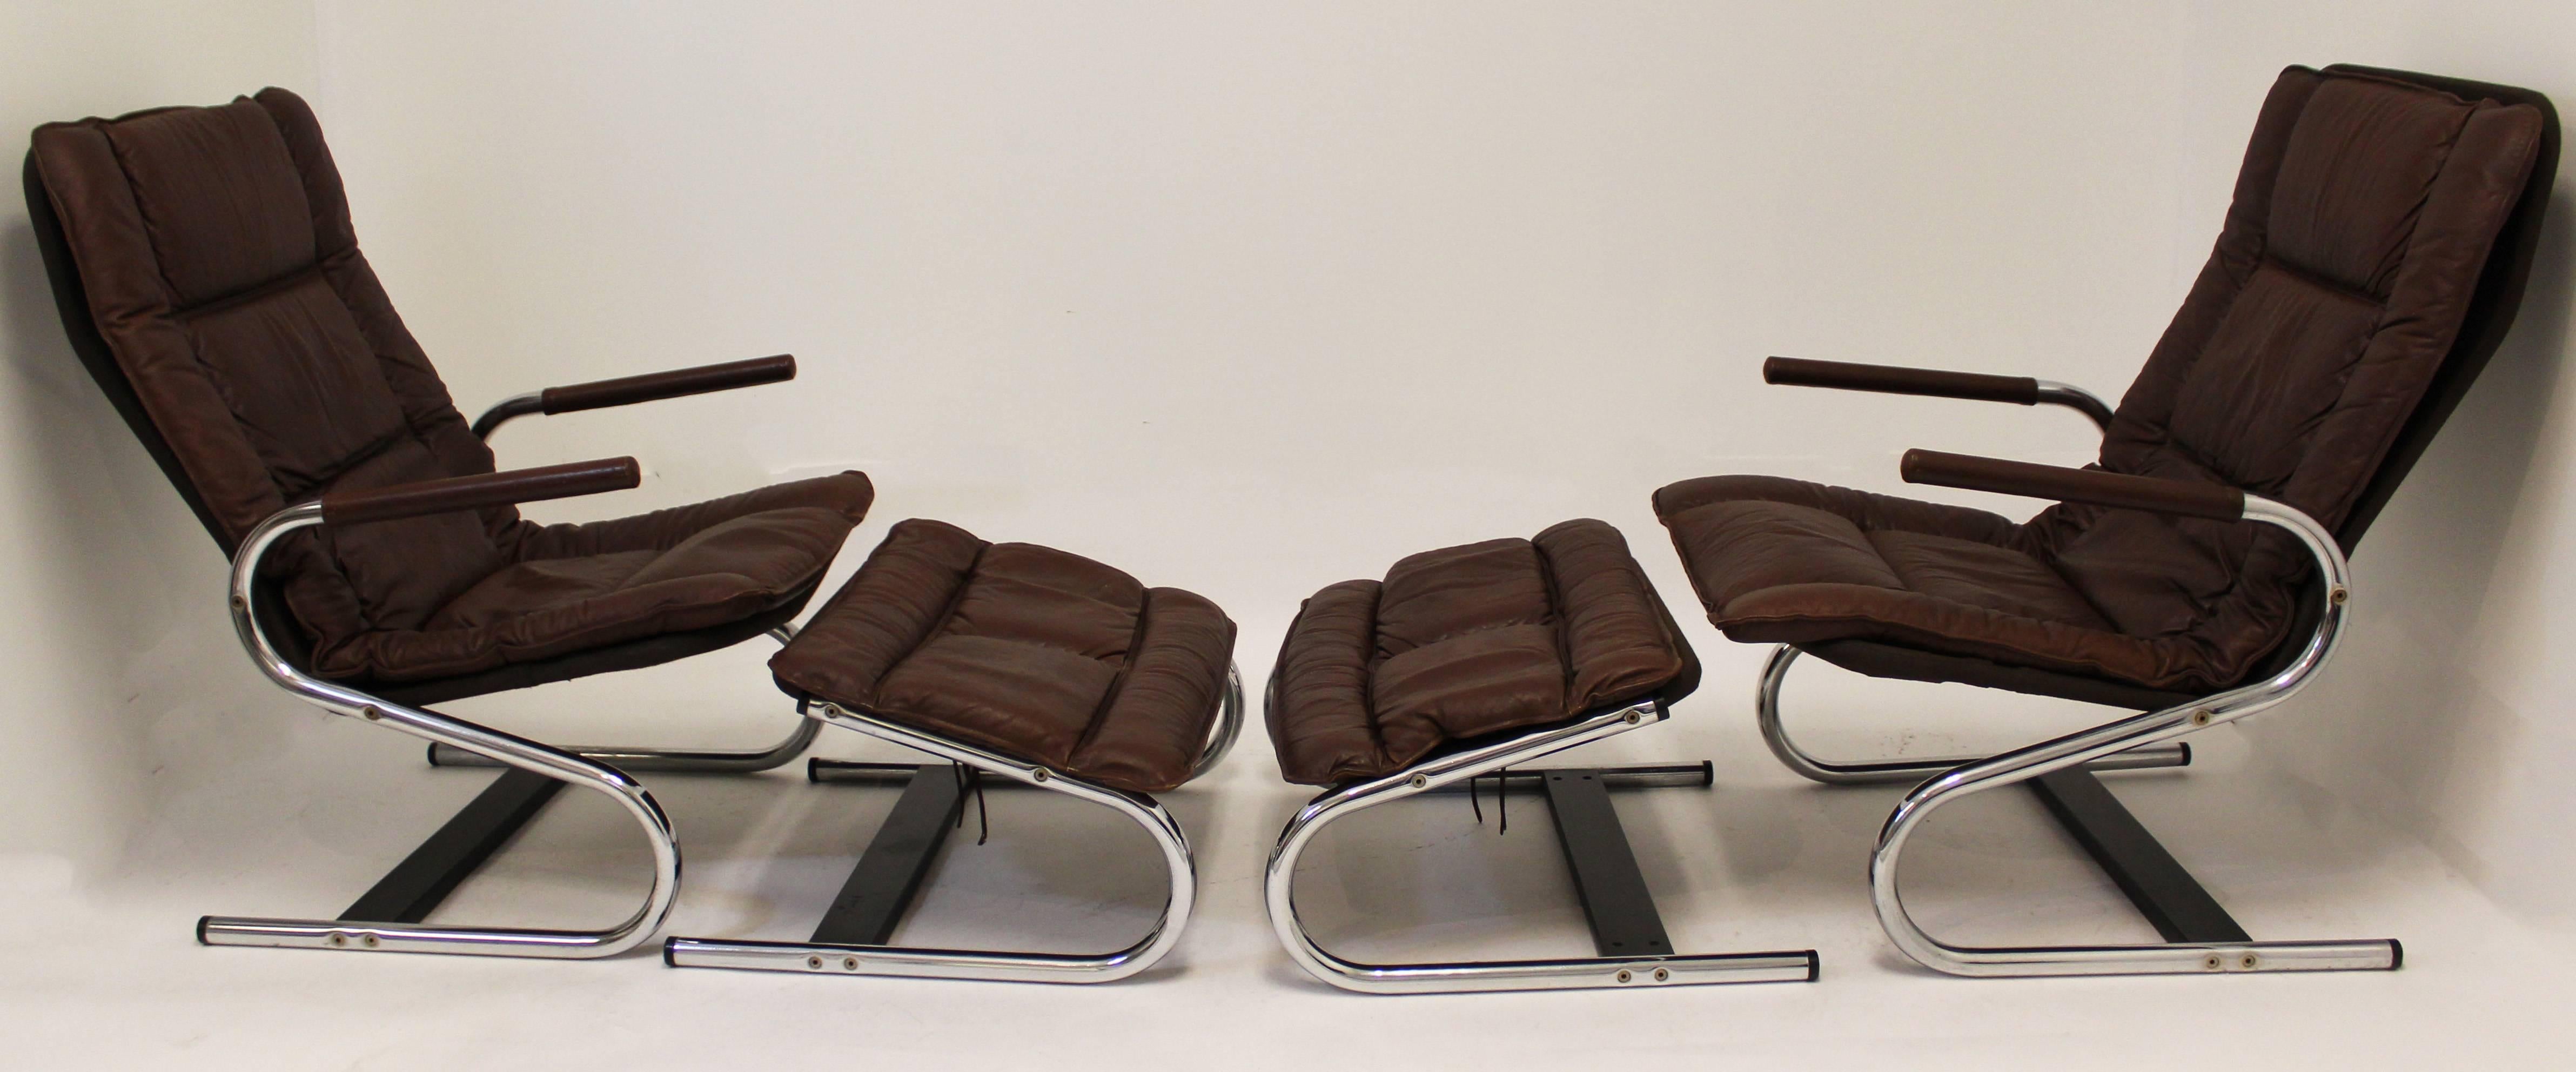 Mid-20th Century Mid-Century Modern Ingmar Relling Pair of Lounge Chairs and Ottomans, Danish